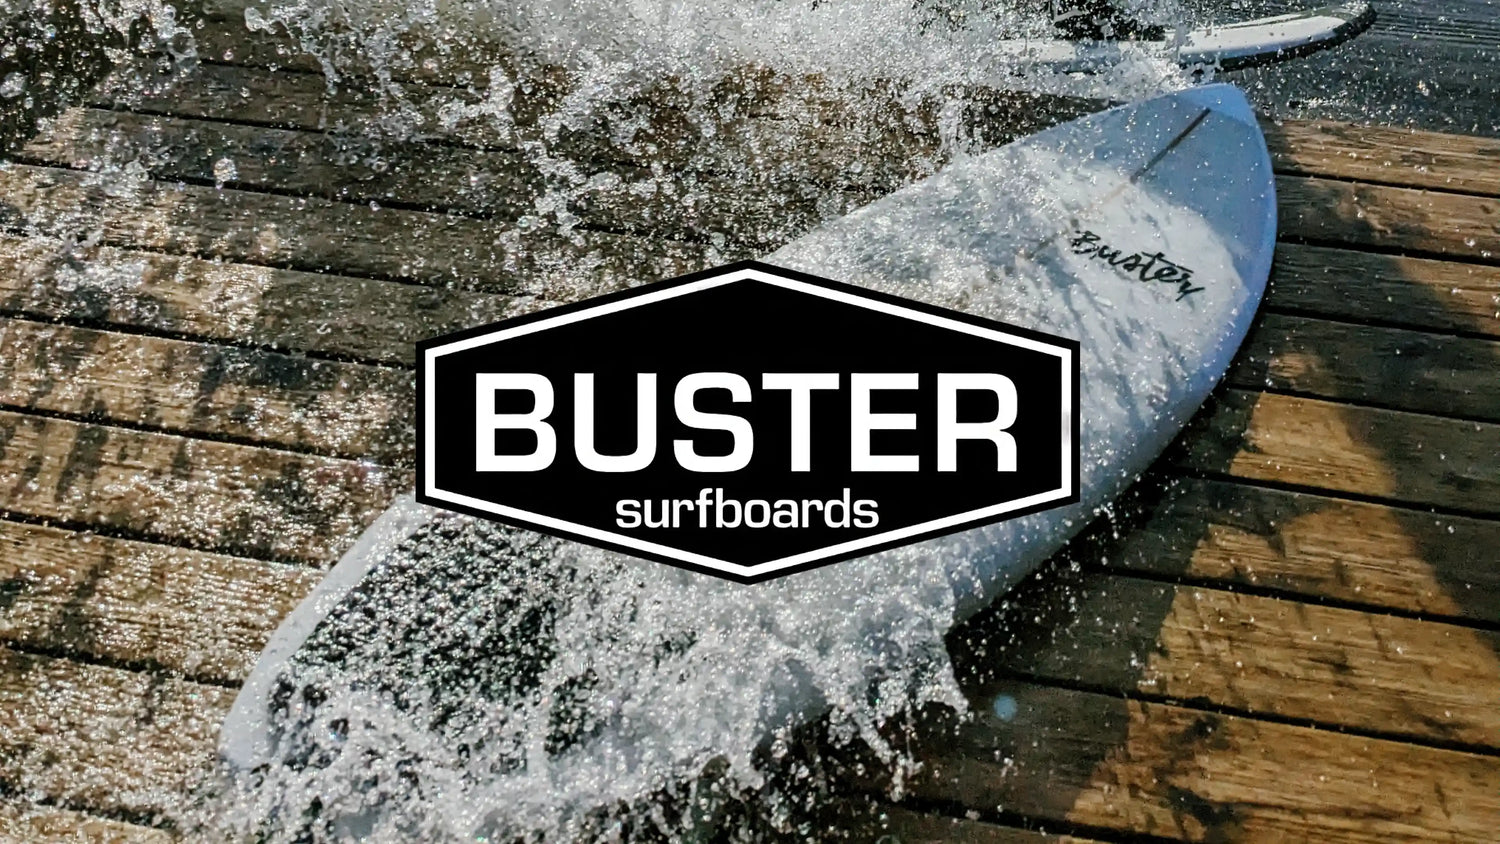 Buster Surfboards surfboard and logo